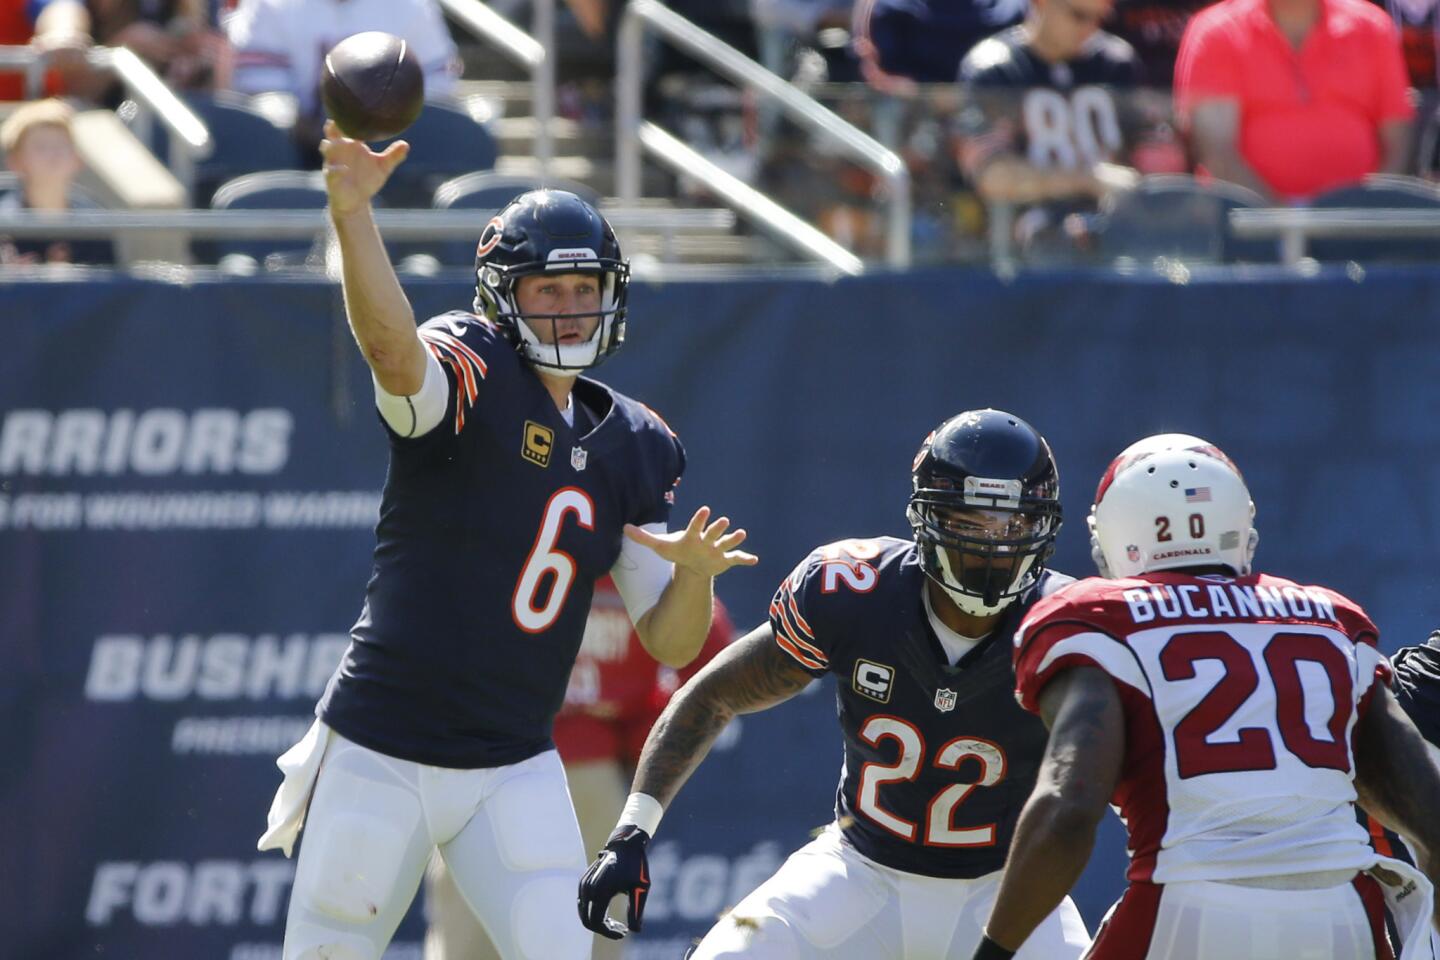 Jay Cutler throws an interception in the second quarter as it is picked off by the Cardinals' Tony Jefferson.